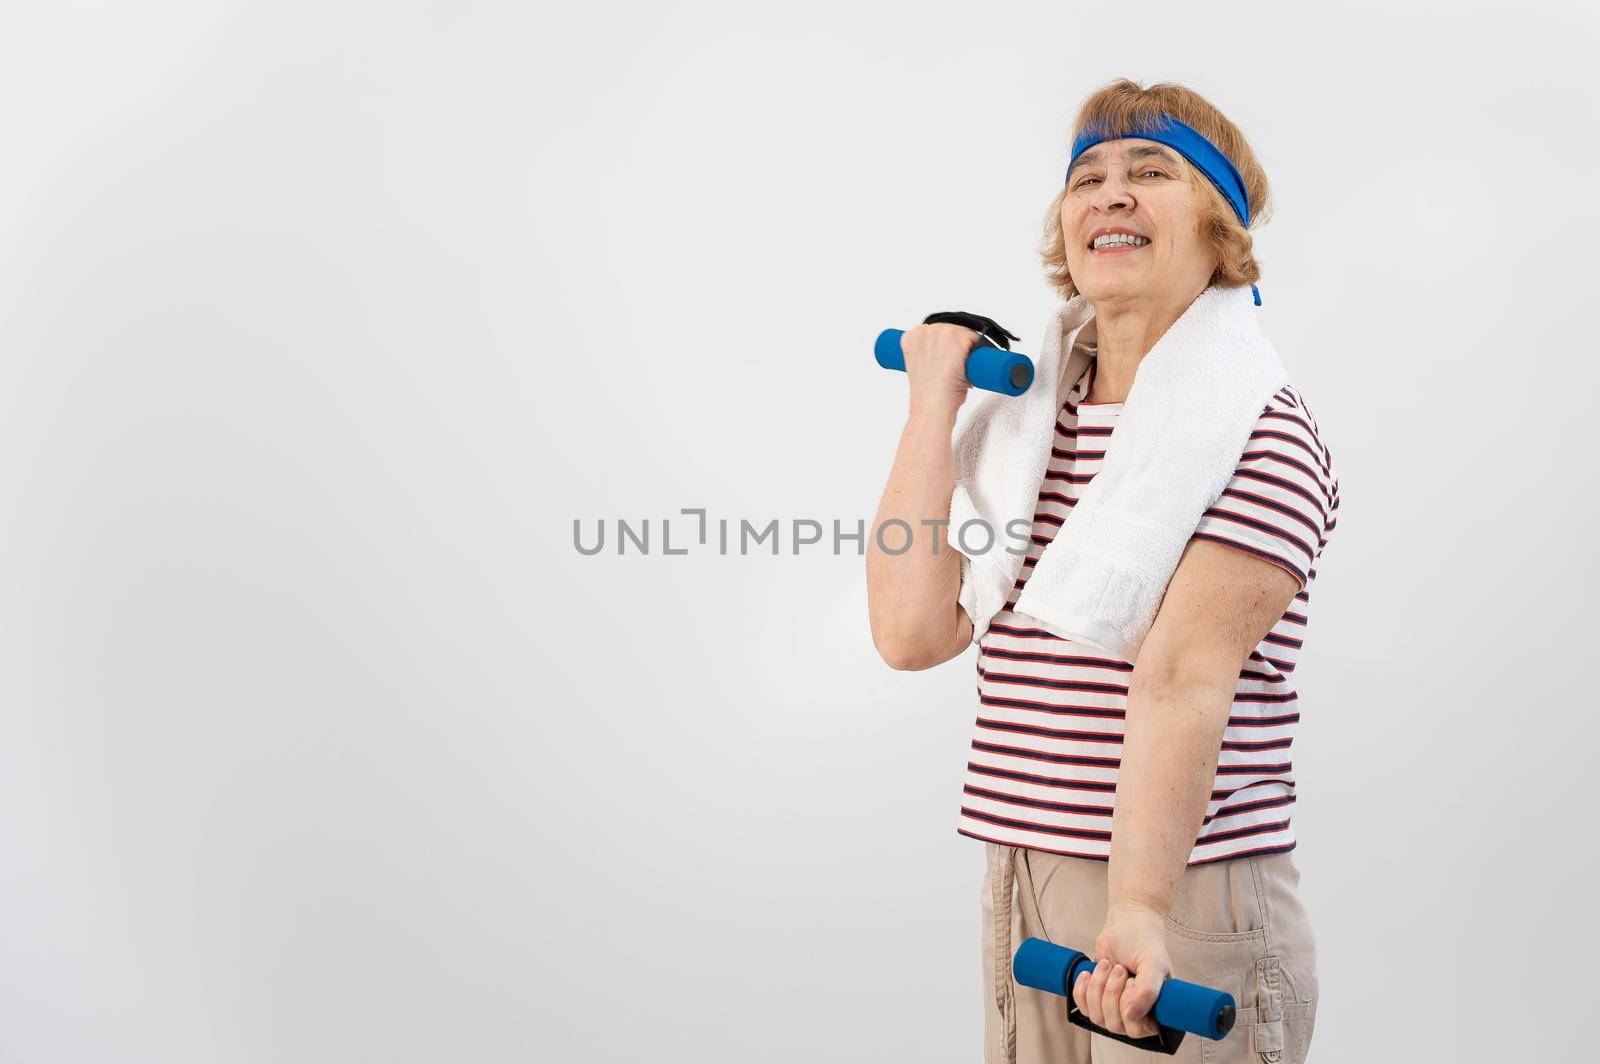 An elderly woman with a blue bandage on her head trains with dumbbells on a white background by mrwed54